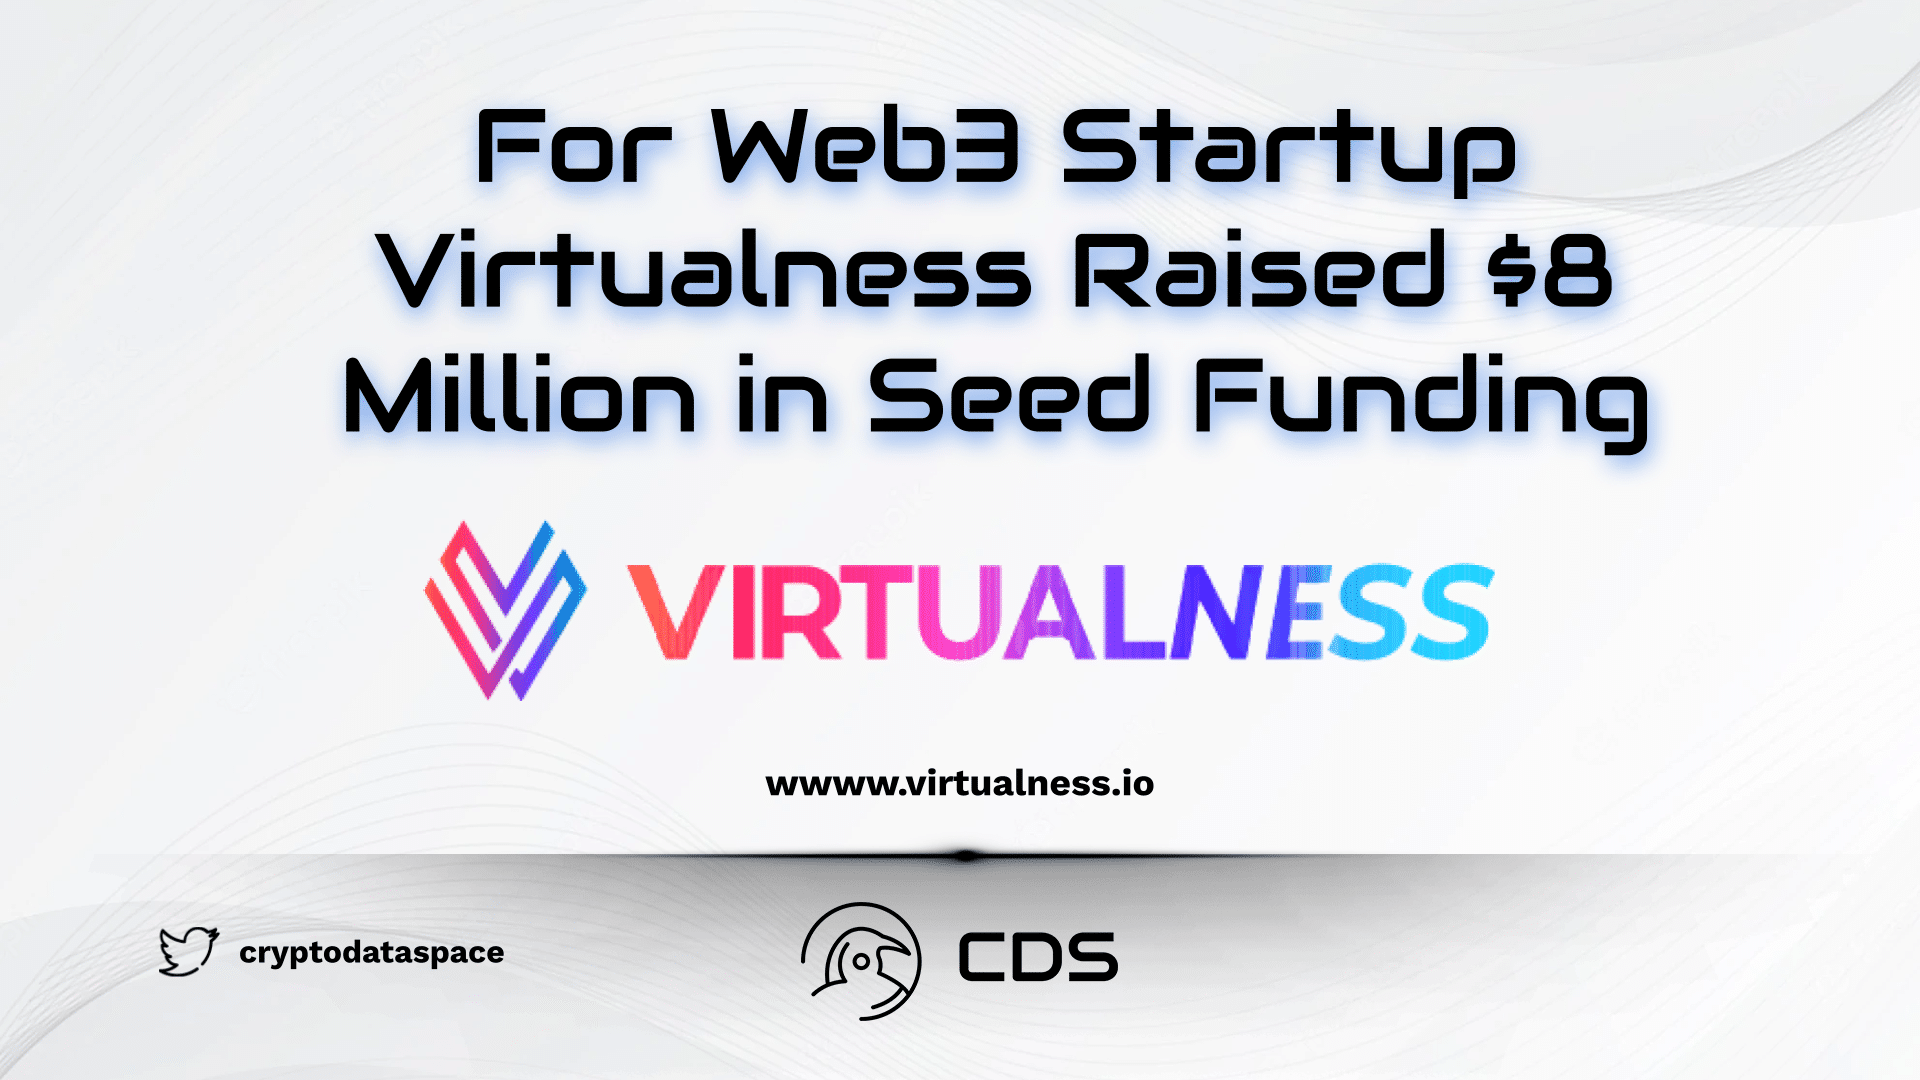 For Web3 Startup Virtualness Raised $8 Million in Seed Funding